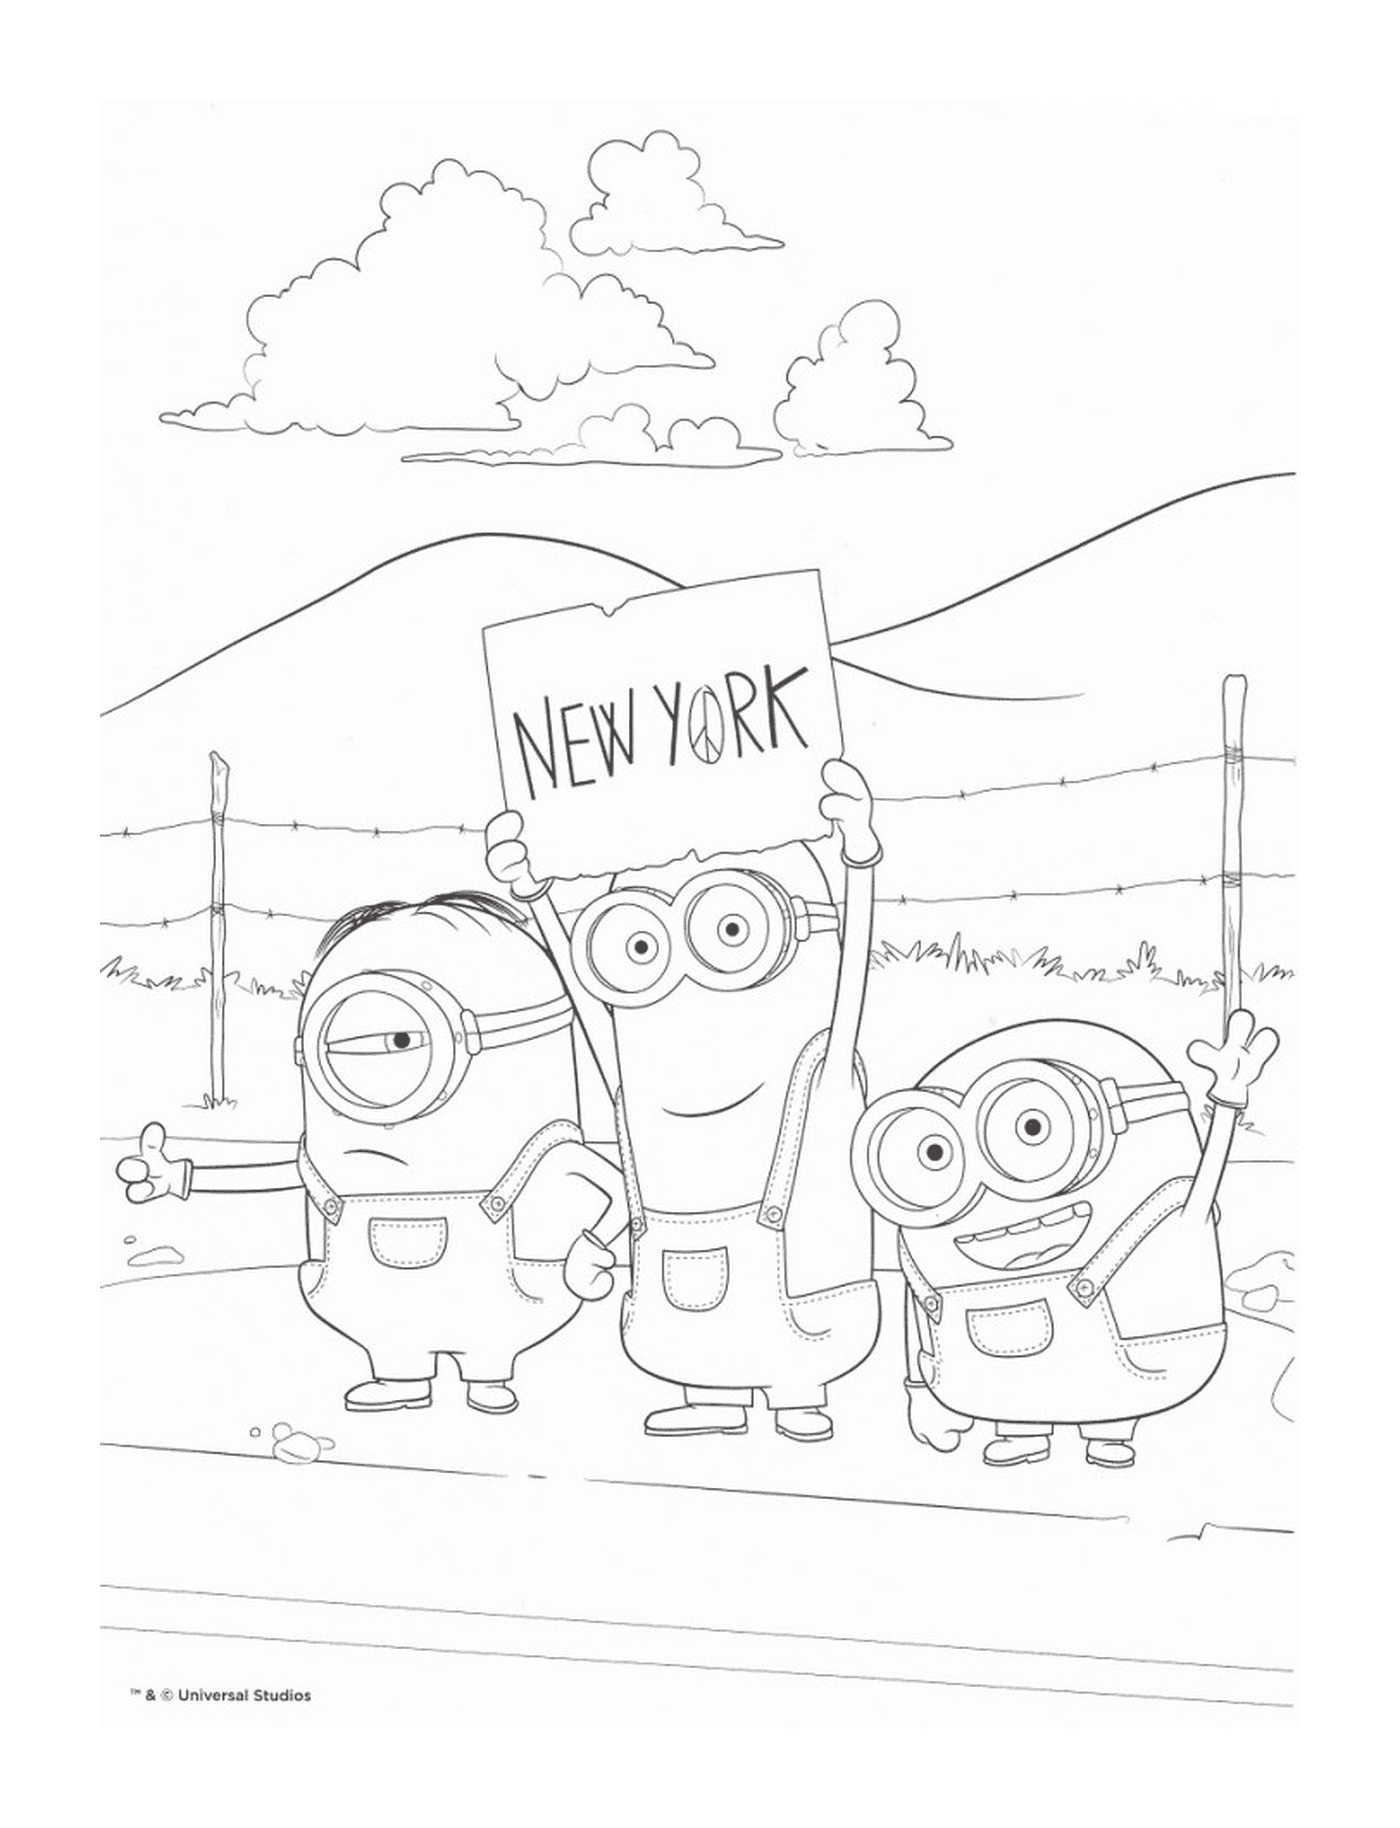  Minion on its way to New York 